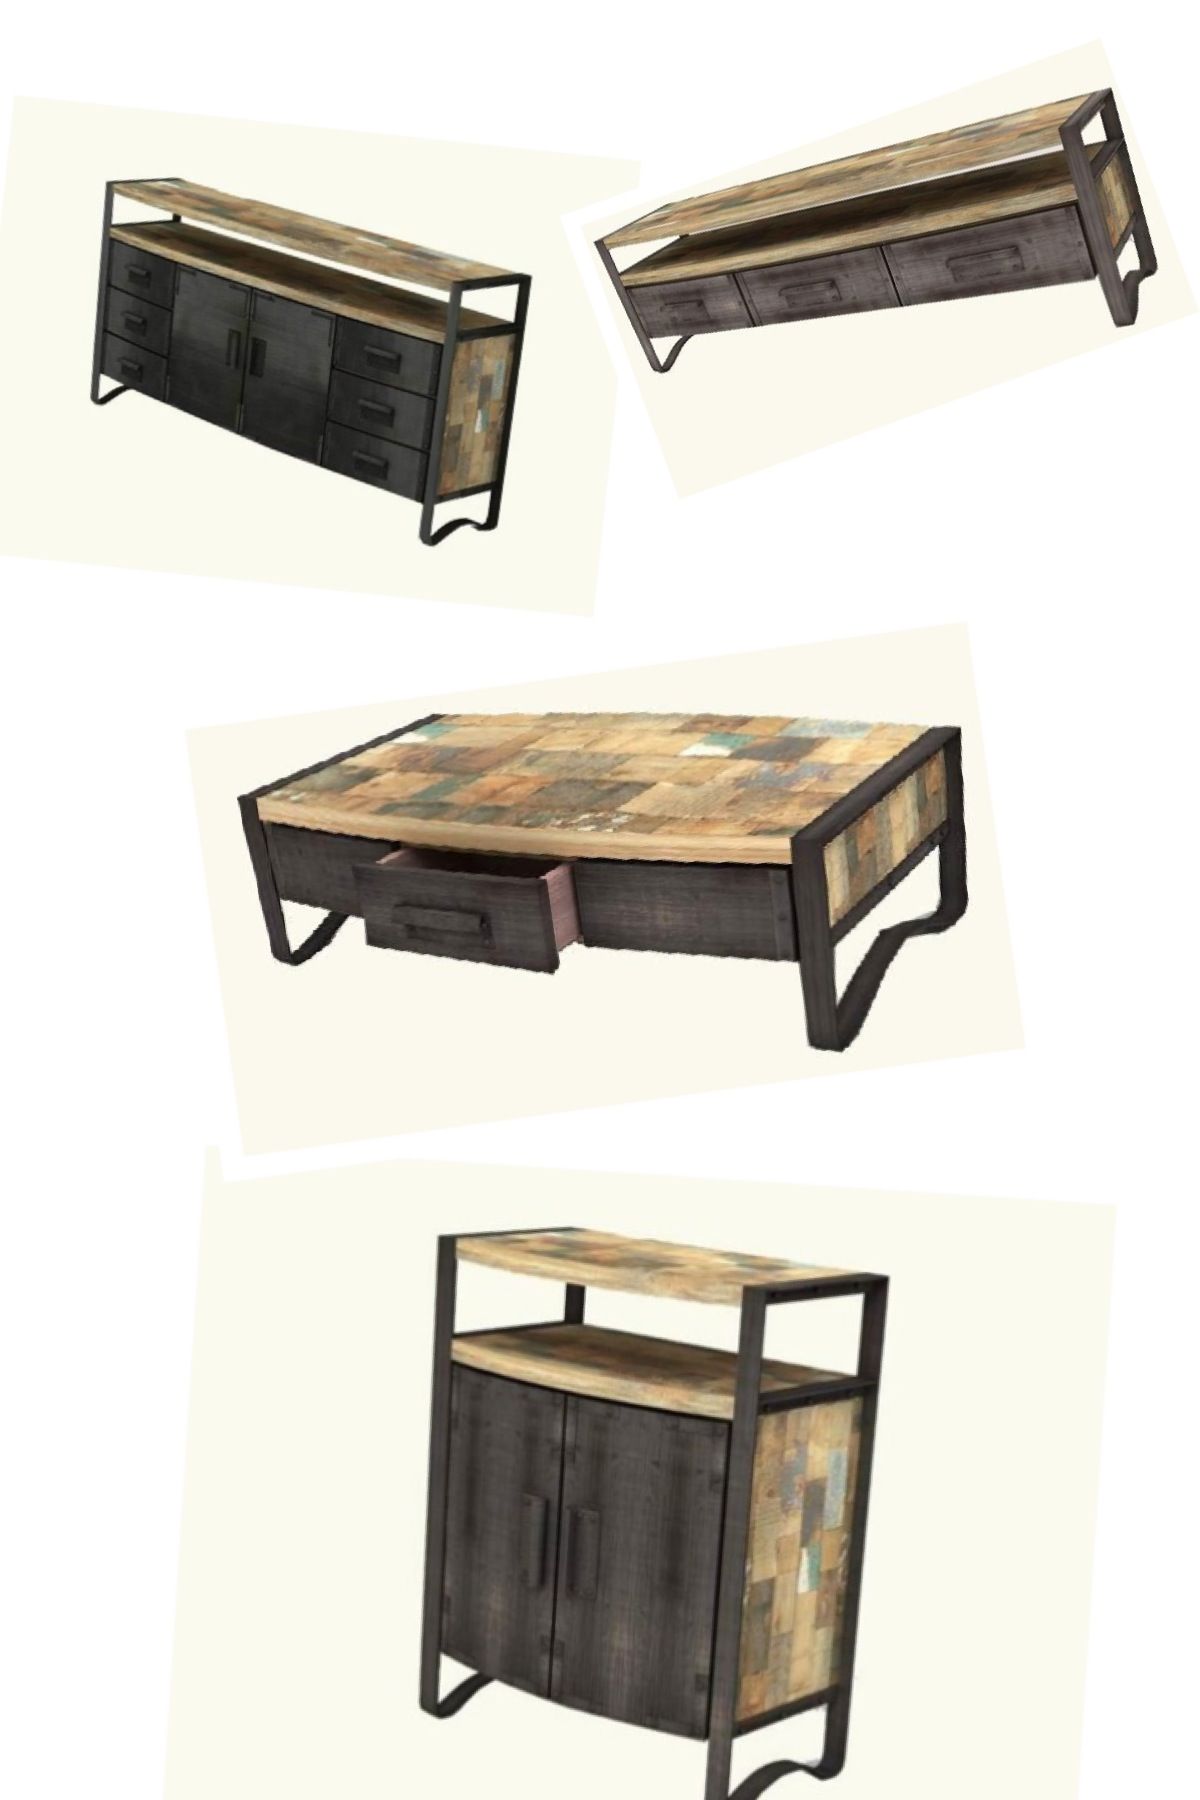 Recycled Boat Wood Furniture Wholesale